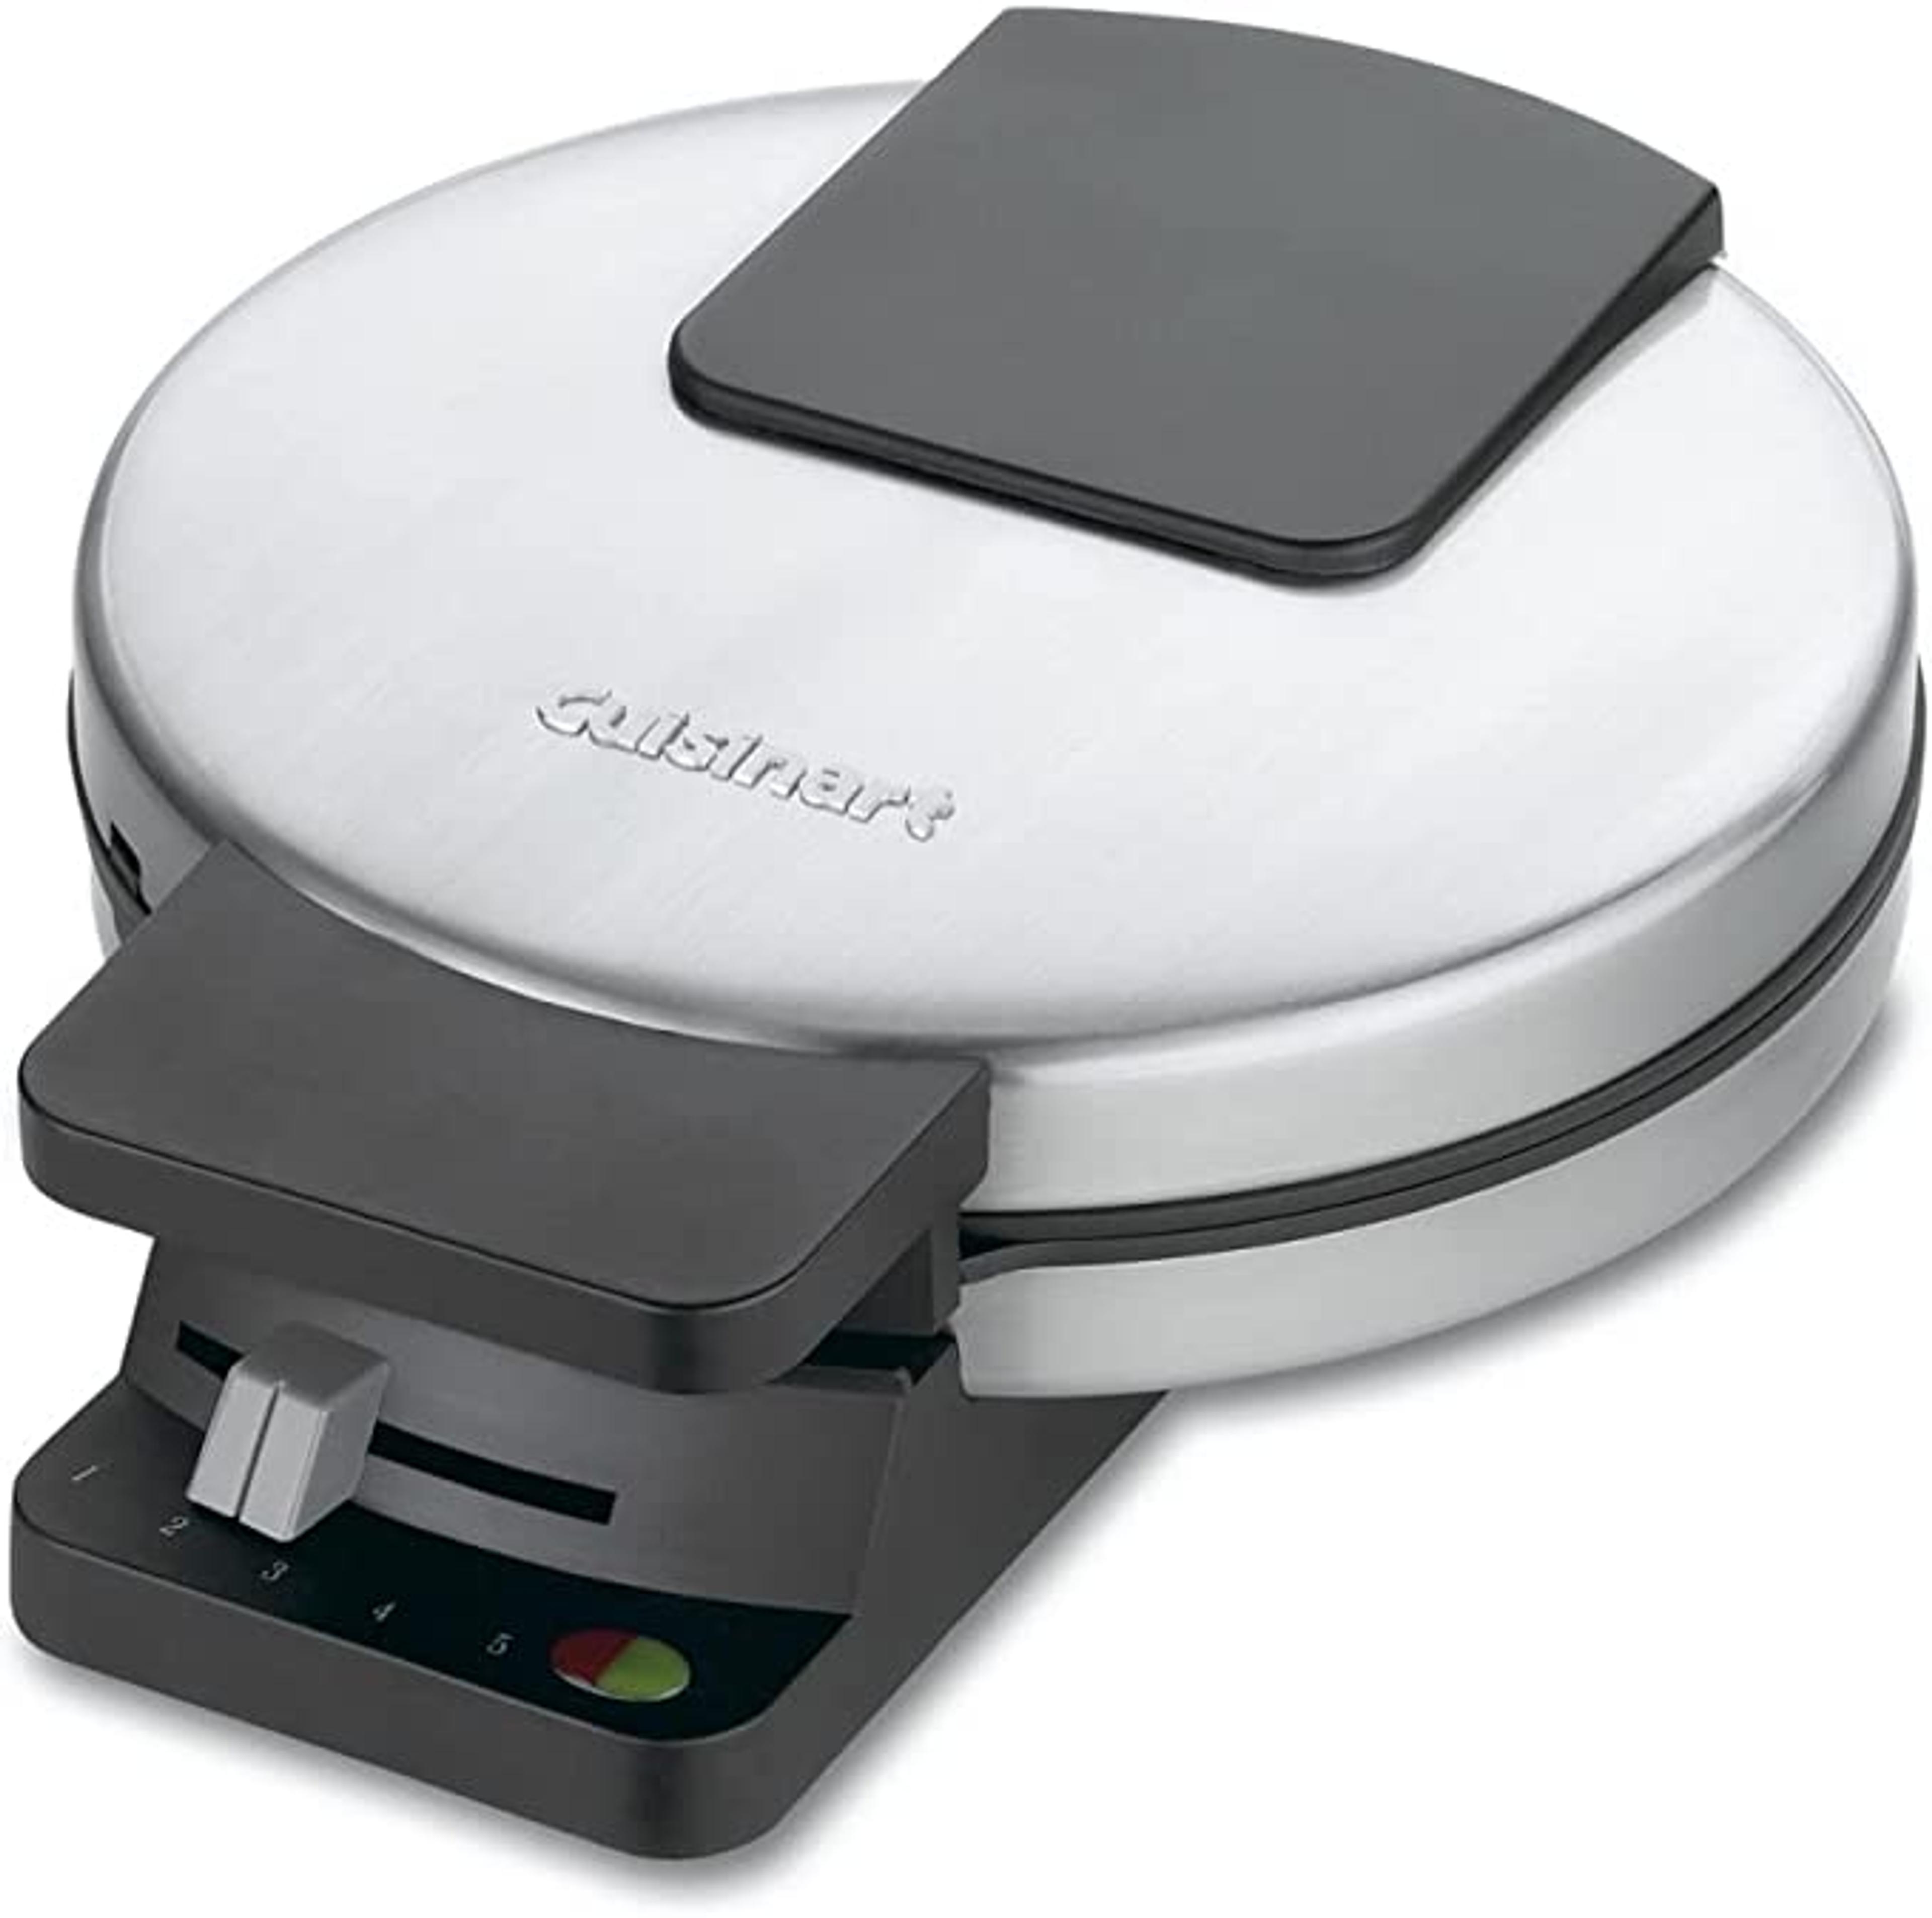 Amazon.com: Cuisinart Classic Waffle Maker, Round, Silver: Electric Waffle Irons: Home & Kitchen